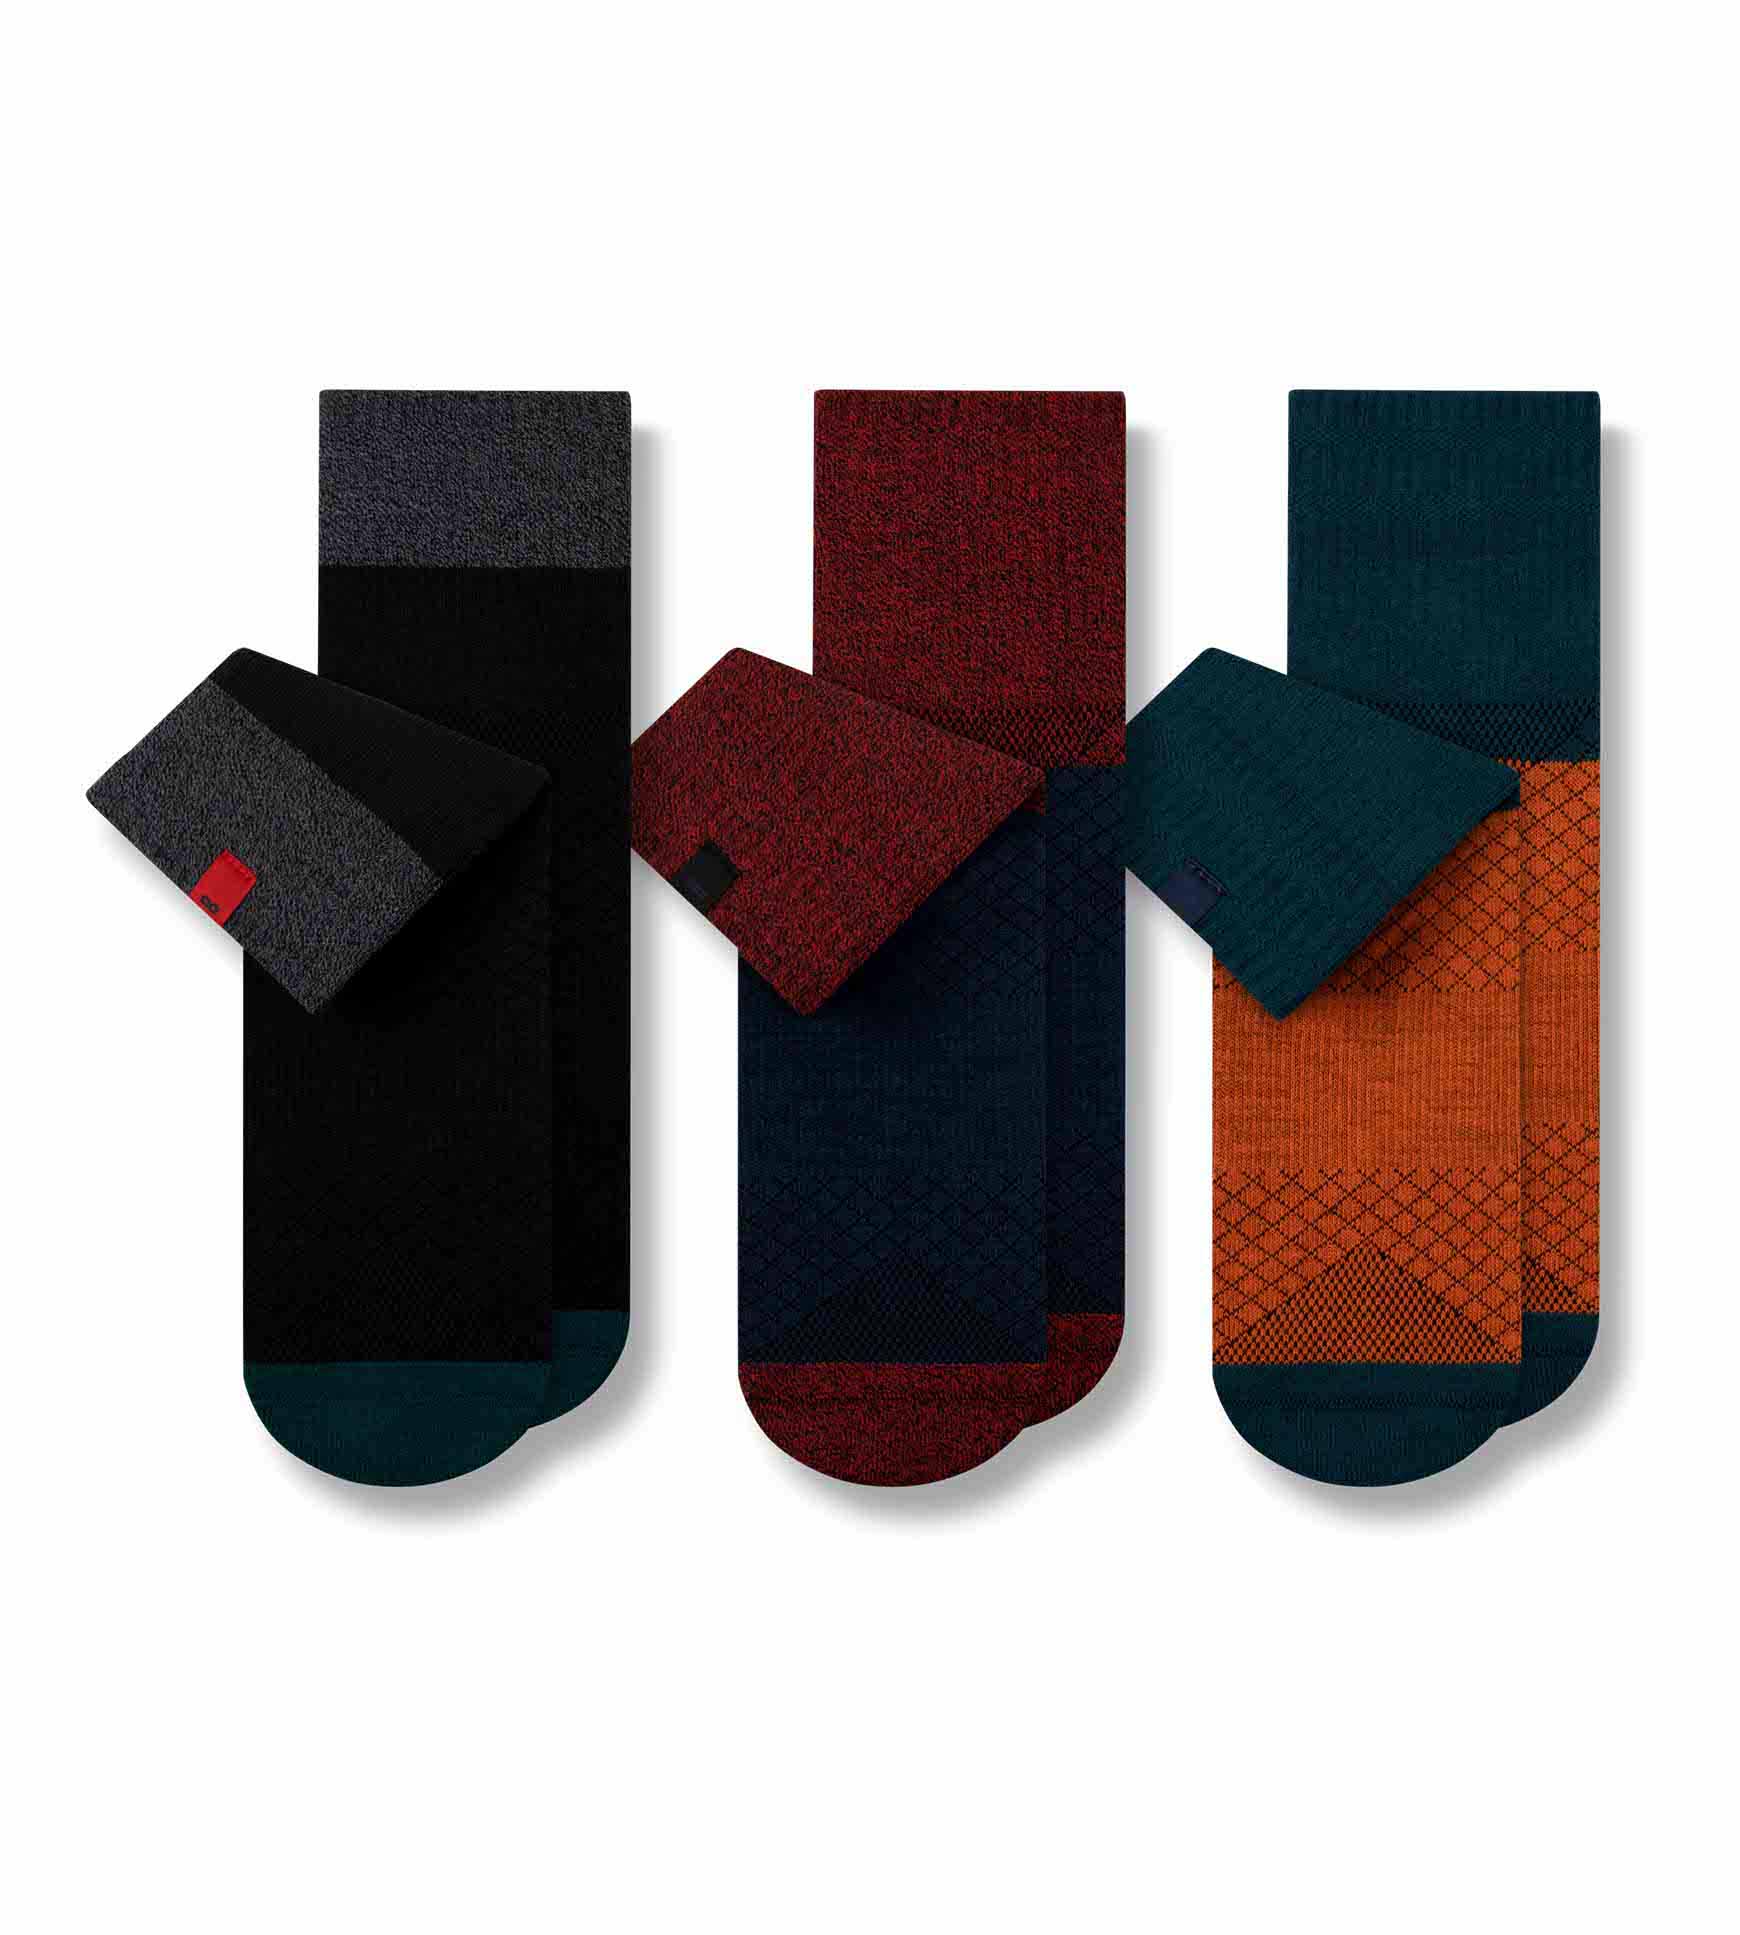 Pair of Thieves Men's Hustle Ankle Socks (3 Pack) - Performance Athletic  Running Socks, Quick Dry, Anti-Odor, 4-Way Stretch at  Men's Clothing  store